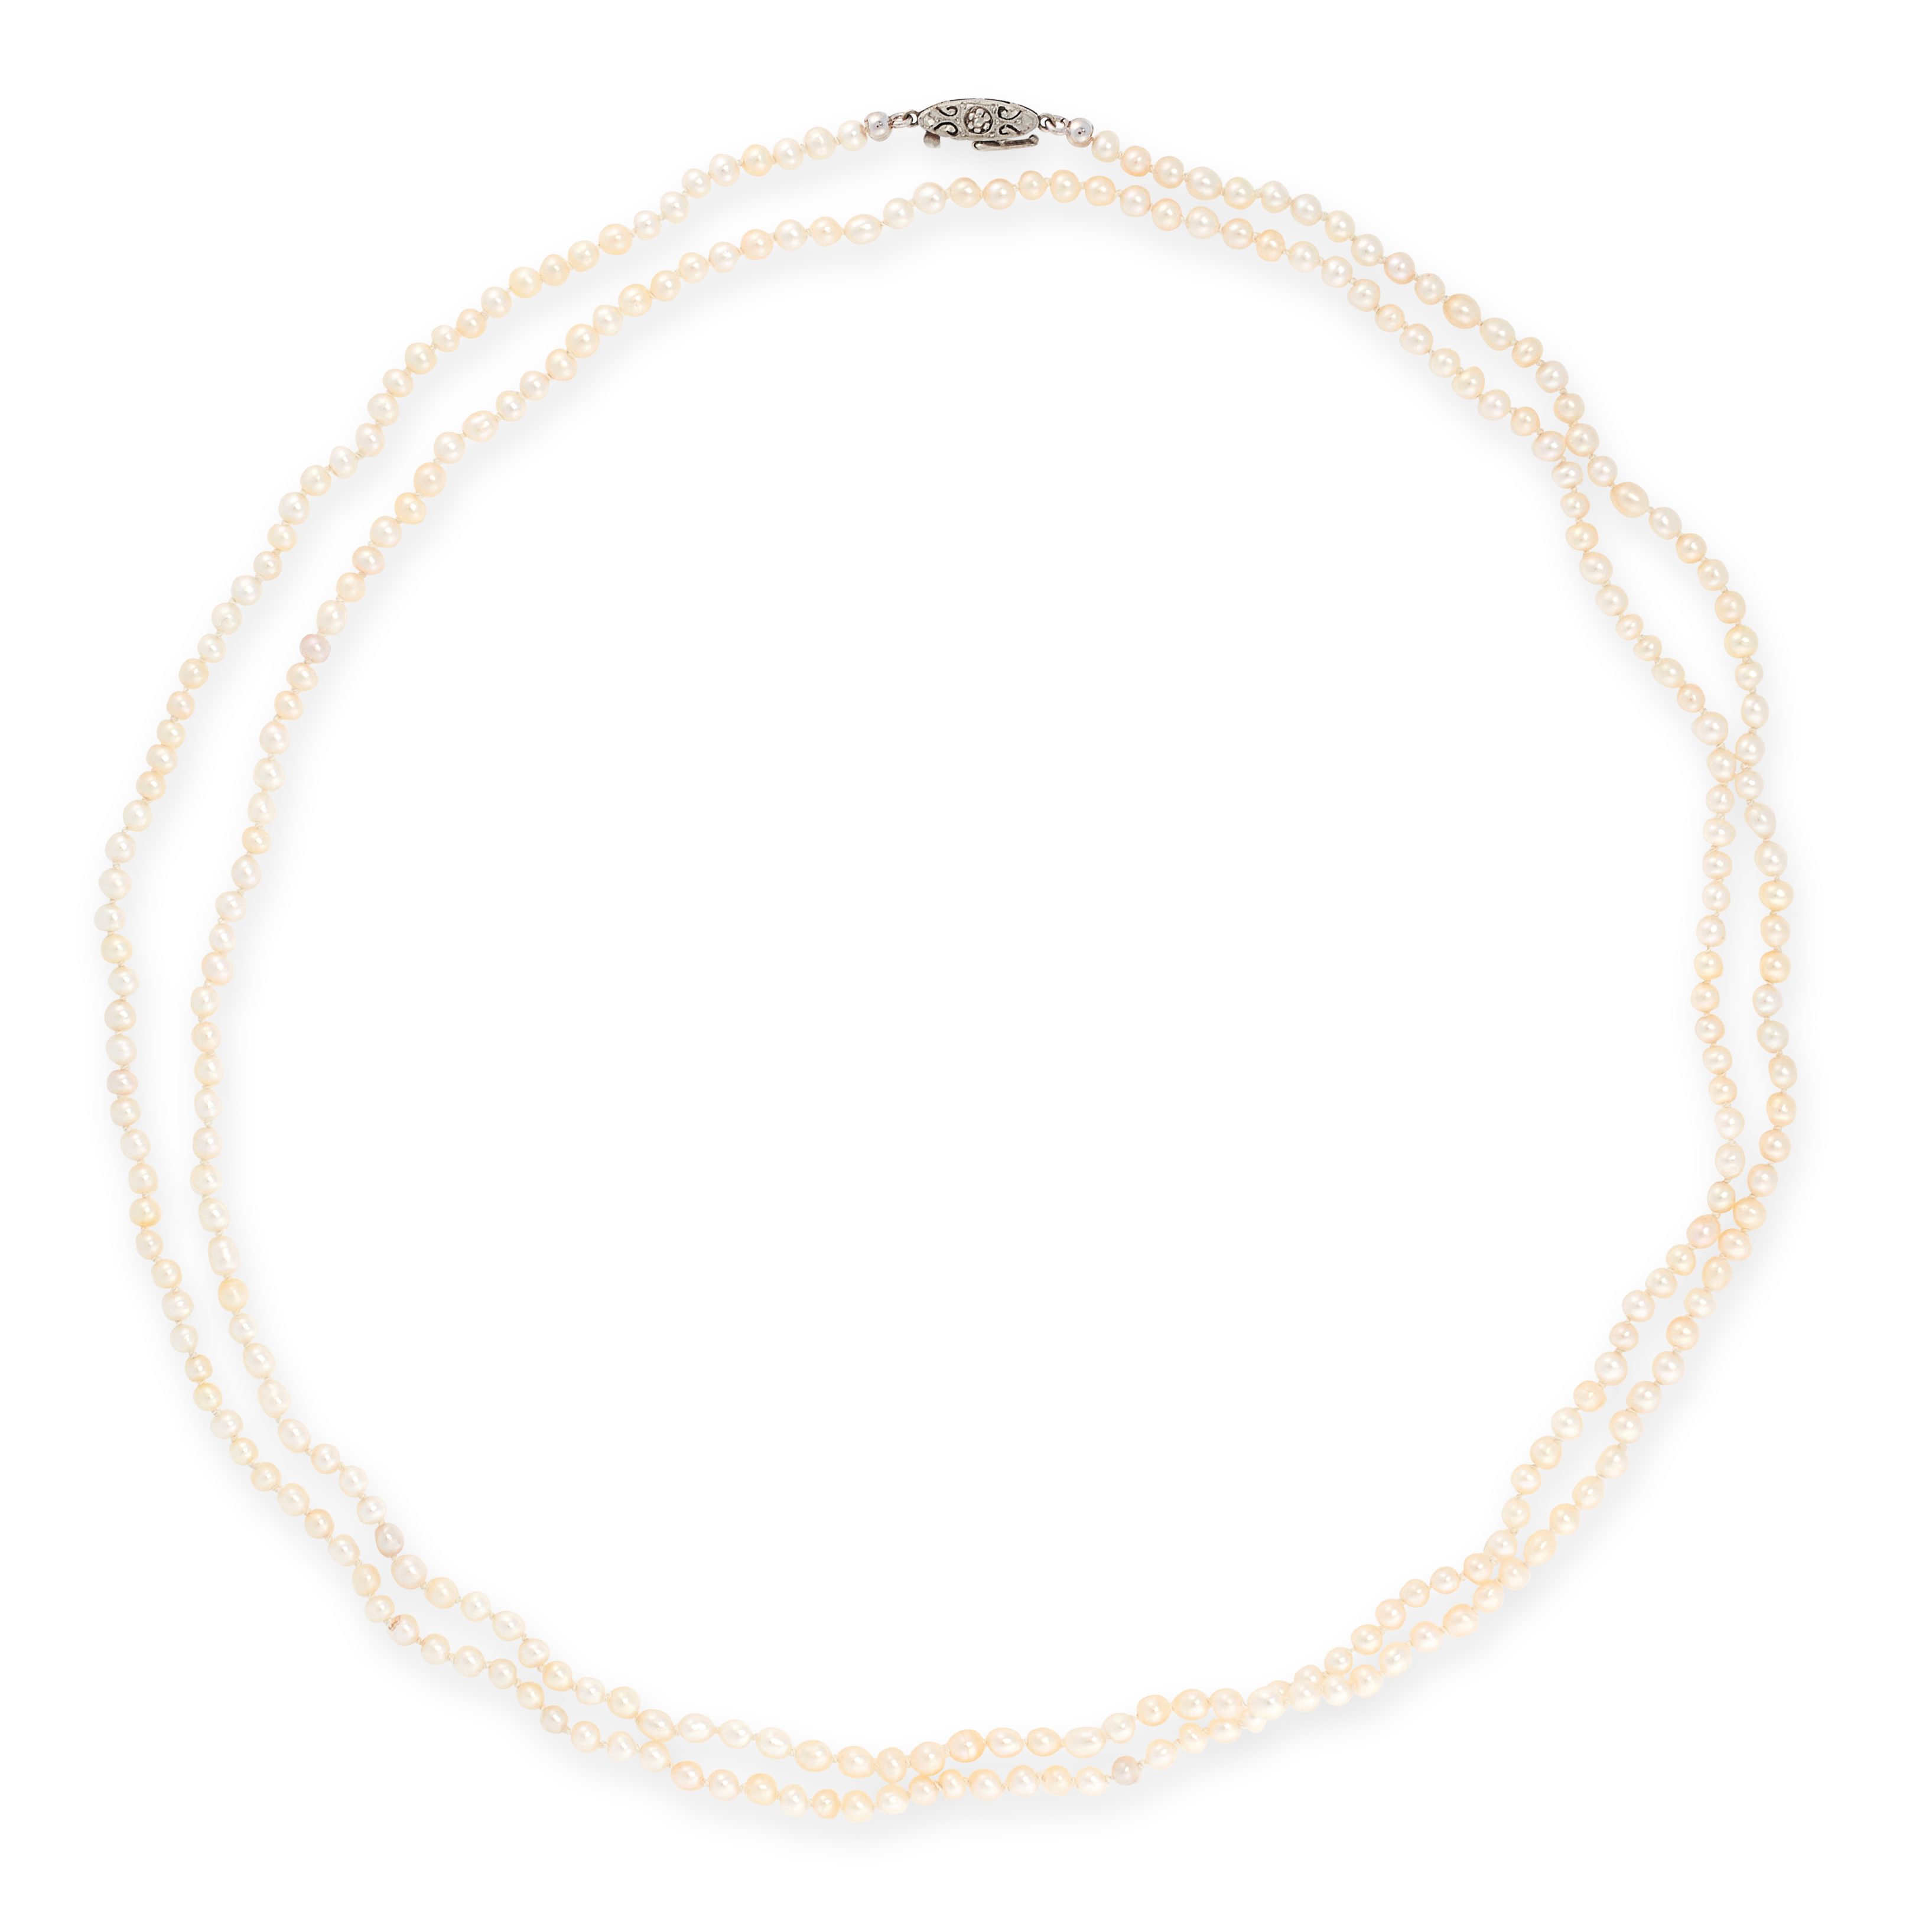 A NATURAL PEARL SAUTOIR NECKLACE in 14ct yellow and white gold, comprising a single row of two